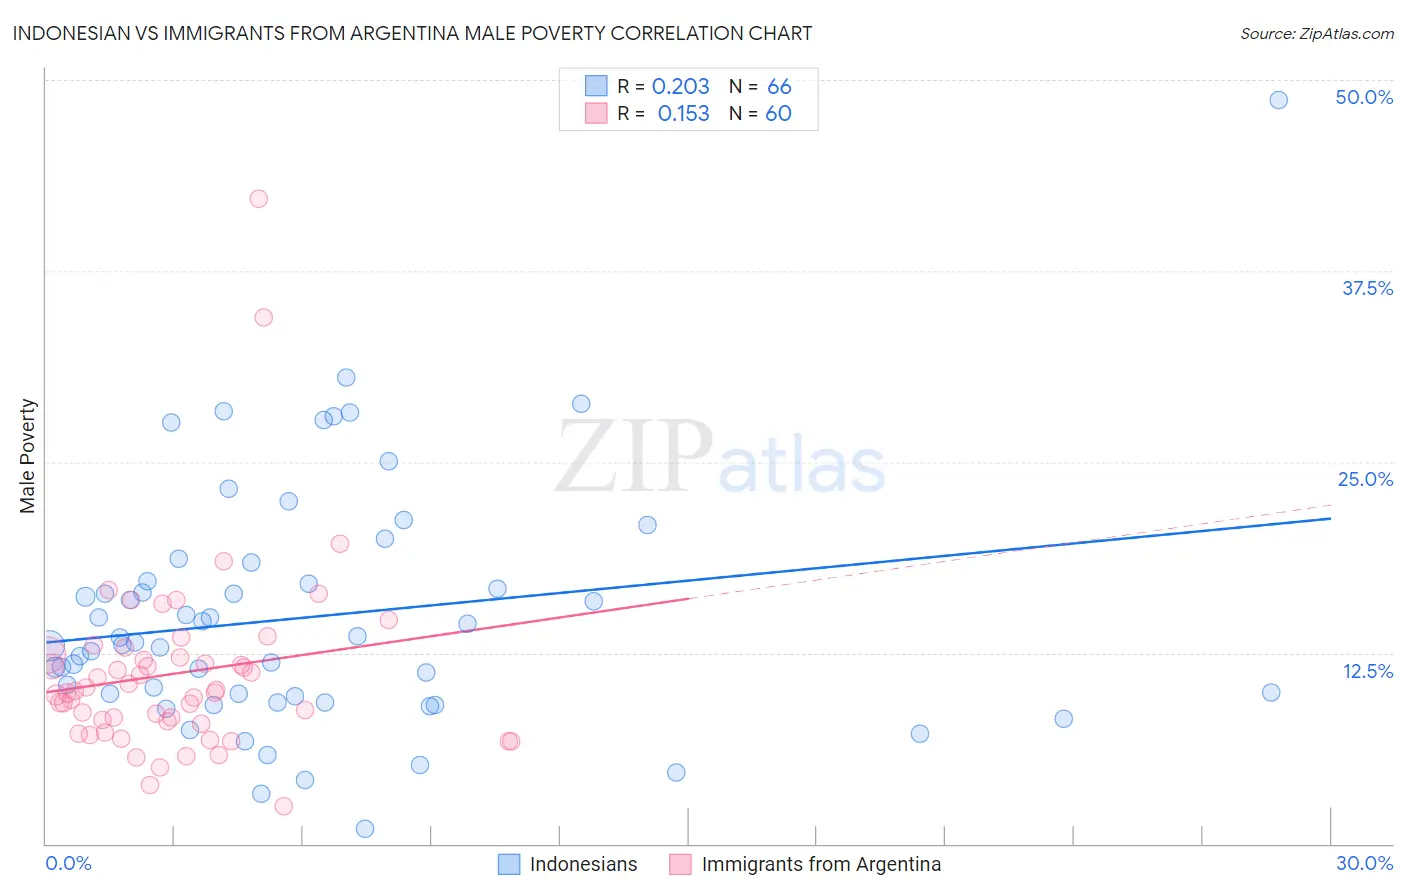 Indonesian vs Immigrants from Argentina Male Poverty